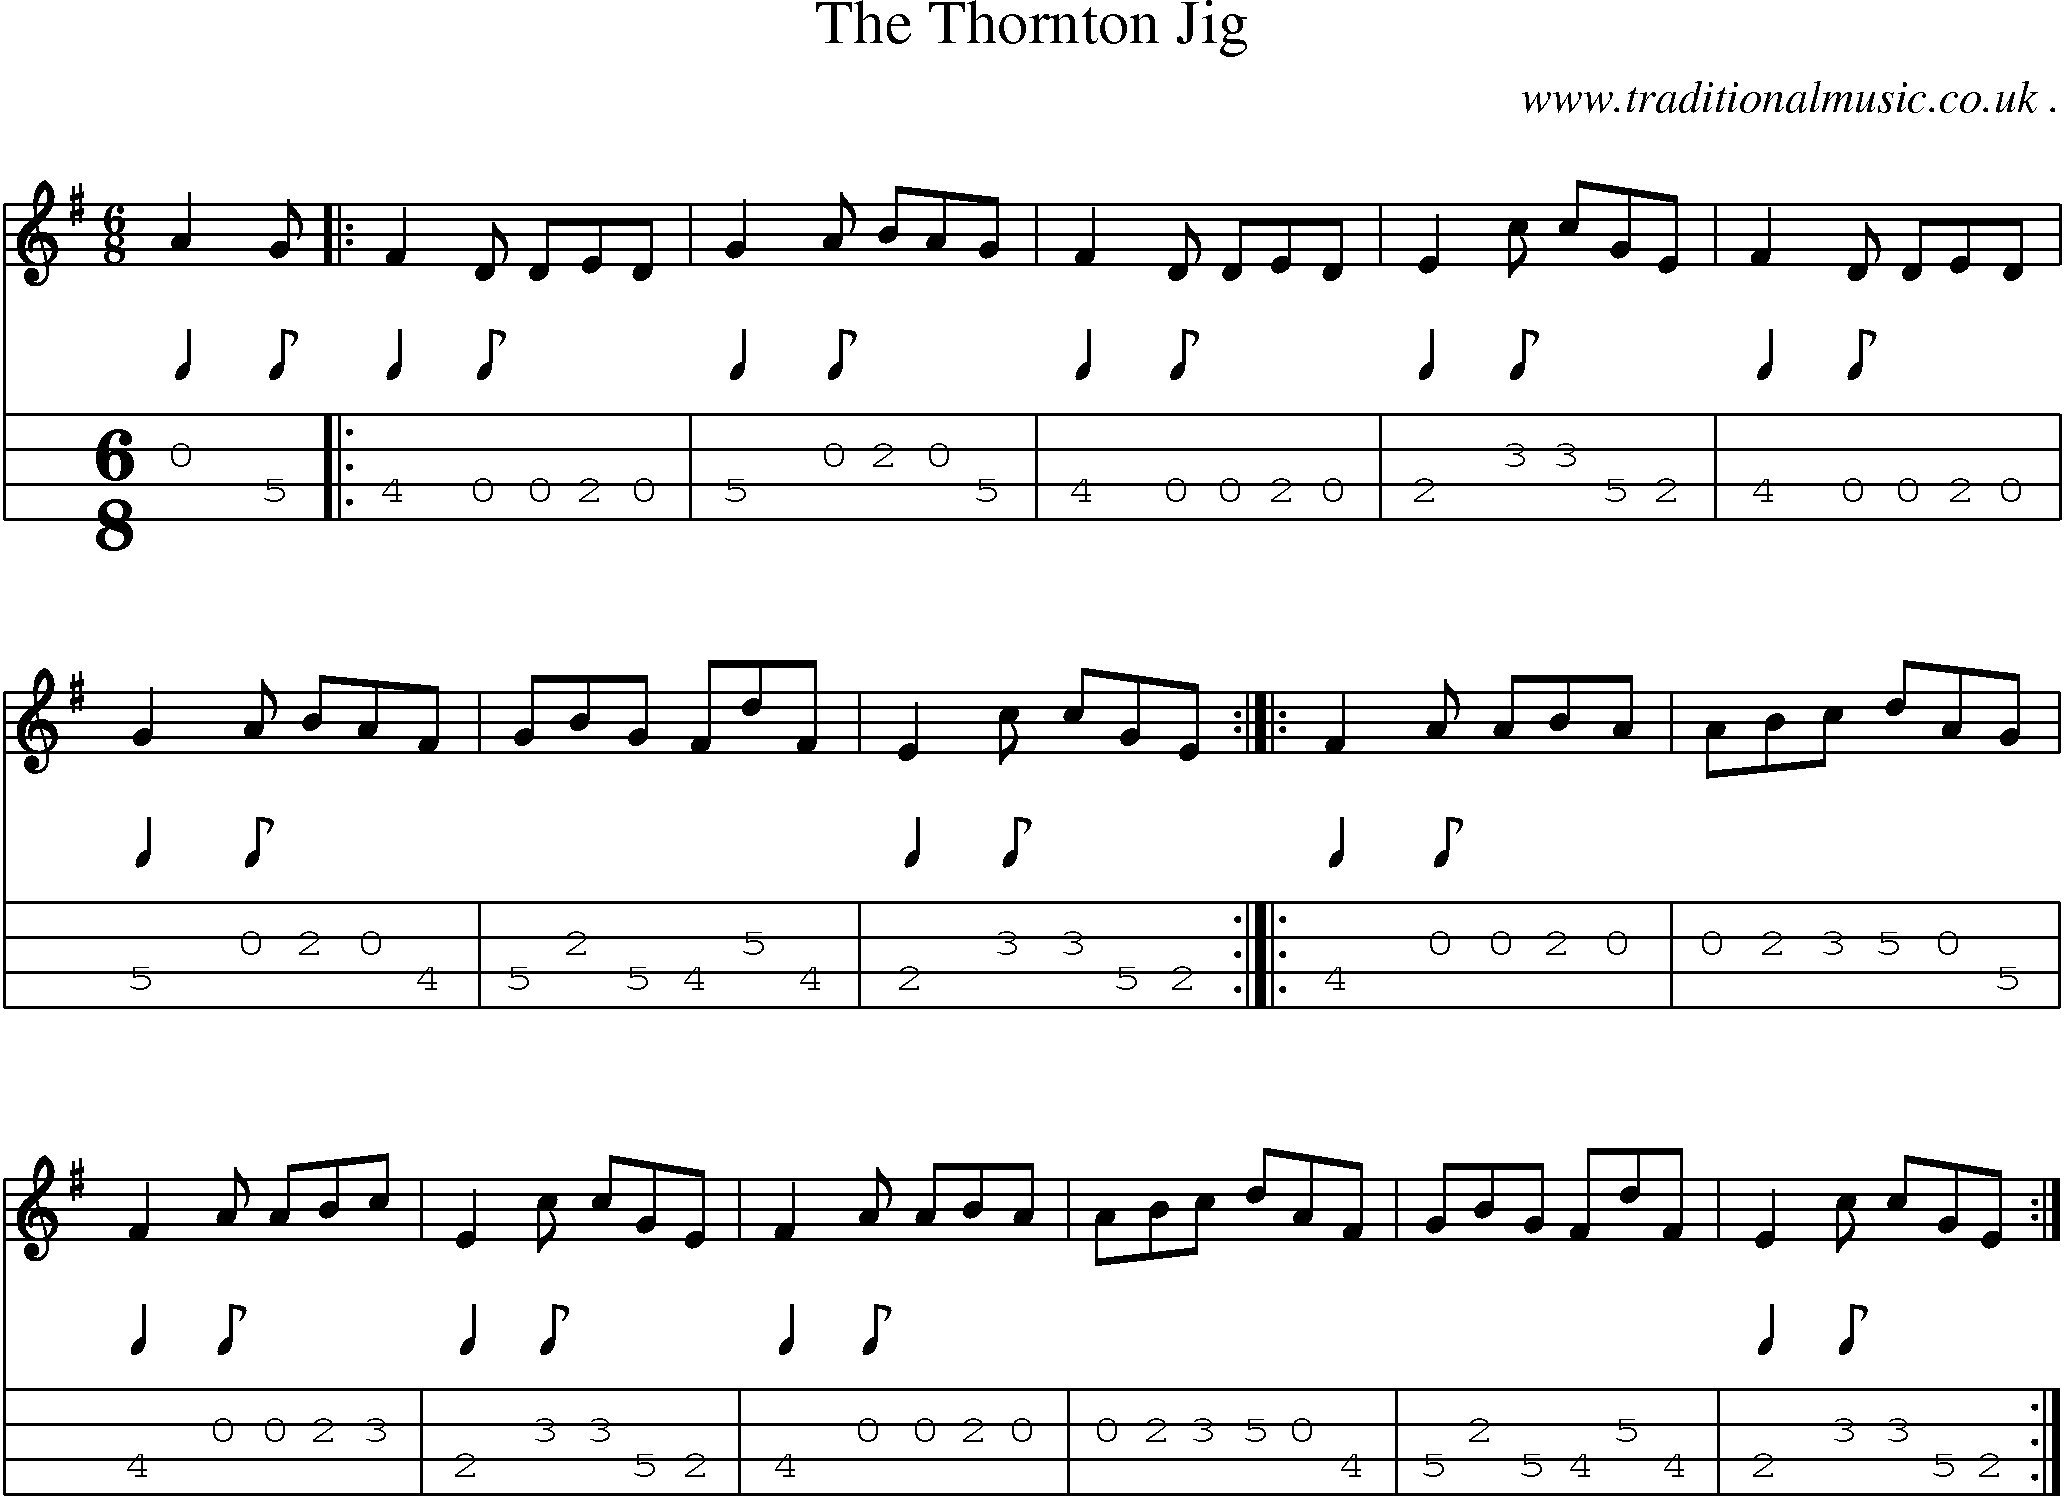 Sheet-music  score, Chords and Mandolin Tabs for The Thornton Jig